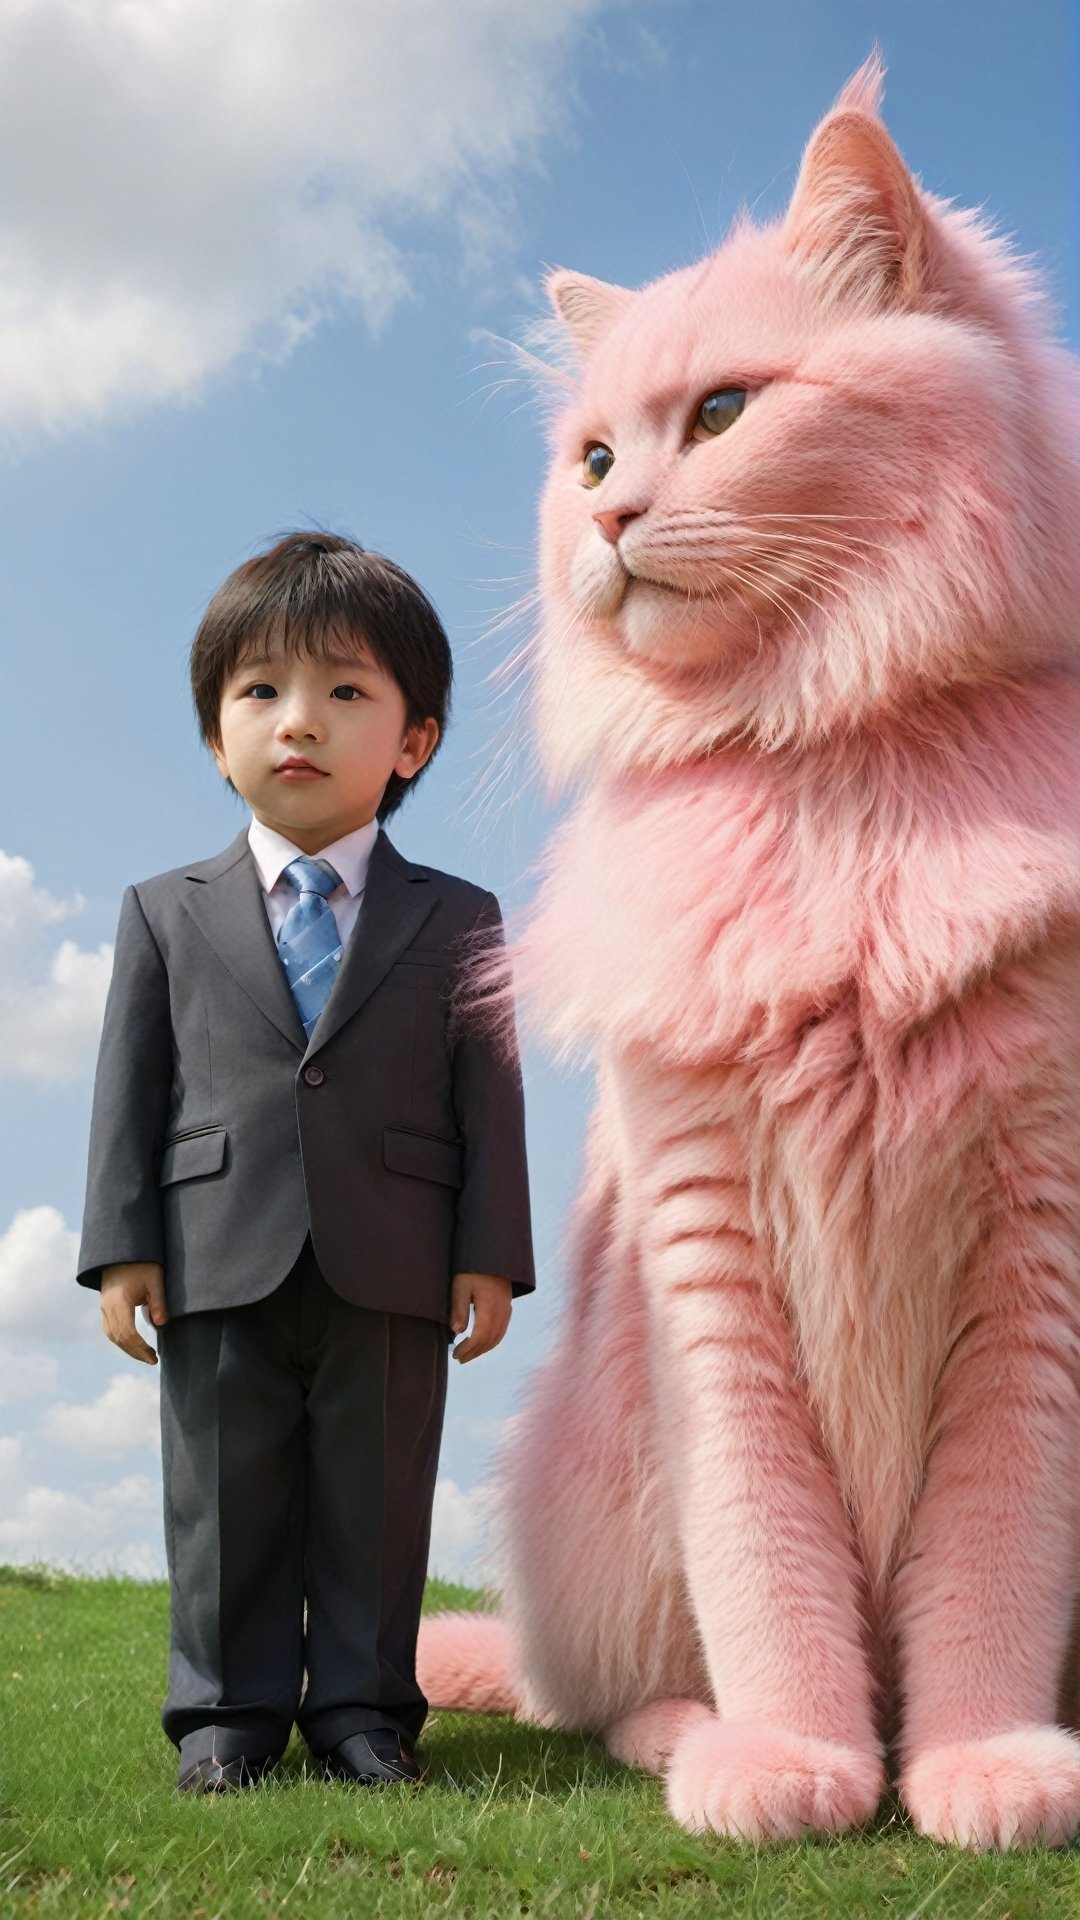 A pink cat with fluffy fur is sitting on the grass, and in front of it sits an Asian babyboy wearing fashion suits. The sky above them has blue clouds, creating a realistic photo style. This scene was captured in the style of Hayao Miyazaki using high definition photography technology. It features a cute giant furry animal character, with detailed details that make people fall under its gaze.